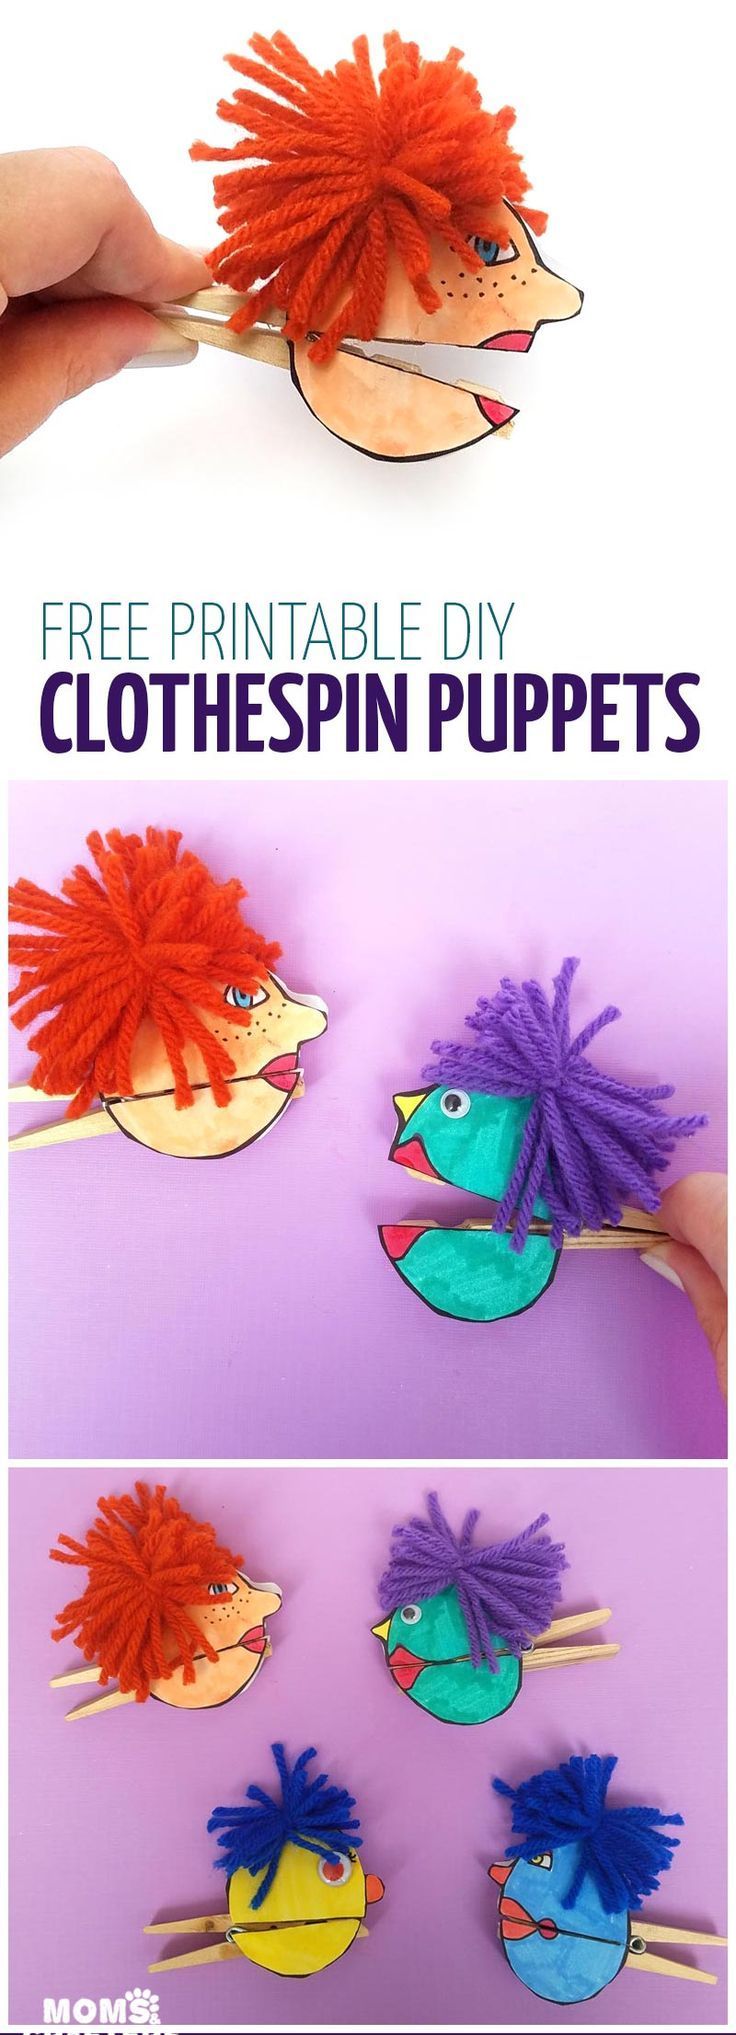 I love these adorable quirky paper puppets – with mouthes that open and close with a clothespin! Love this unique, easy clothespin